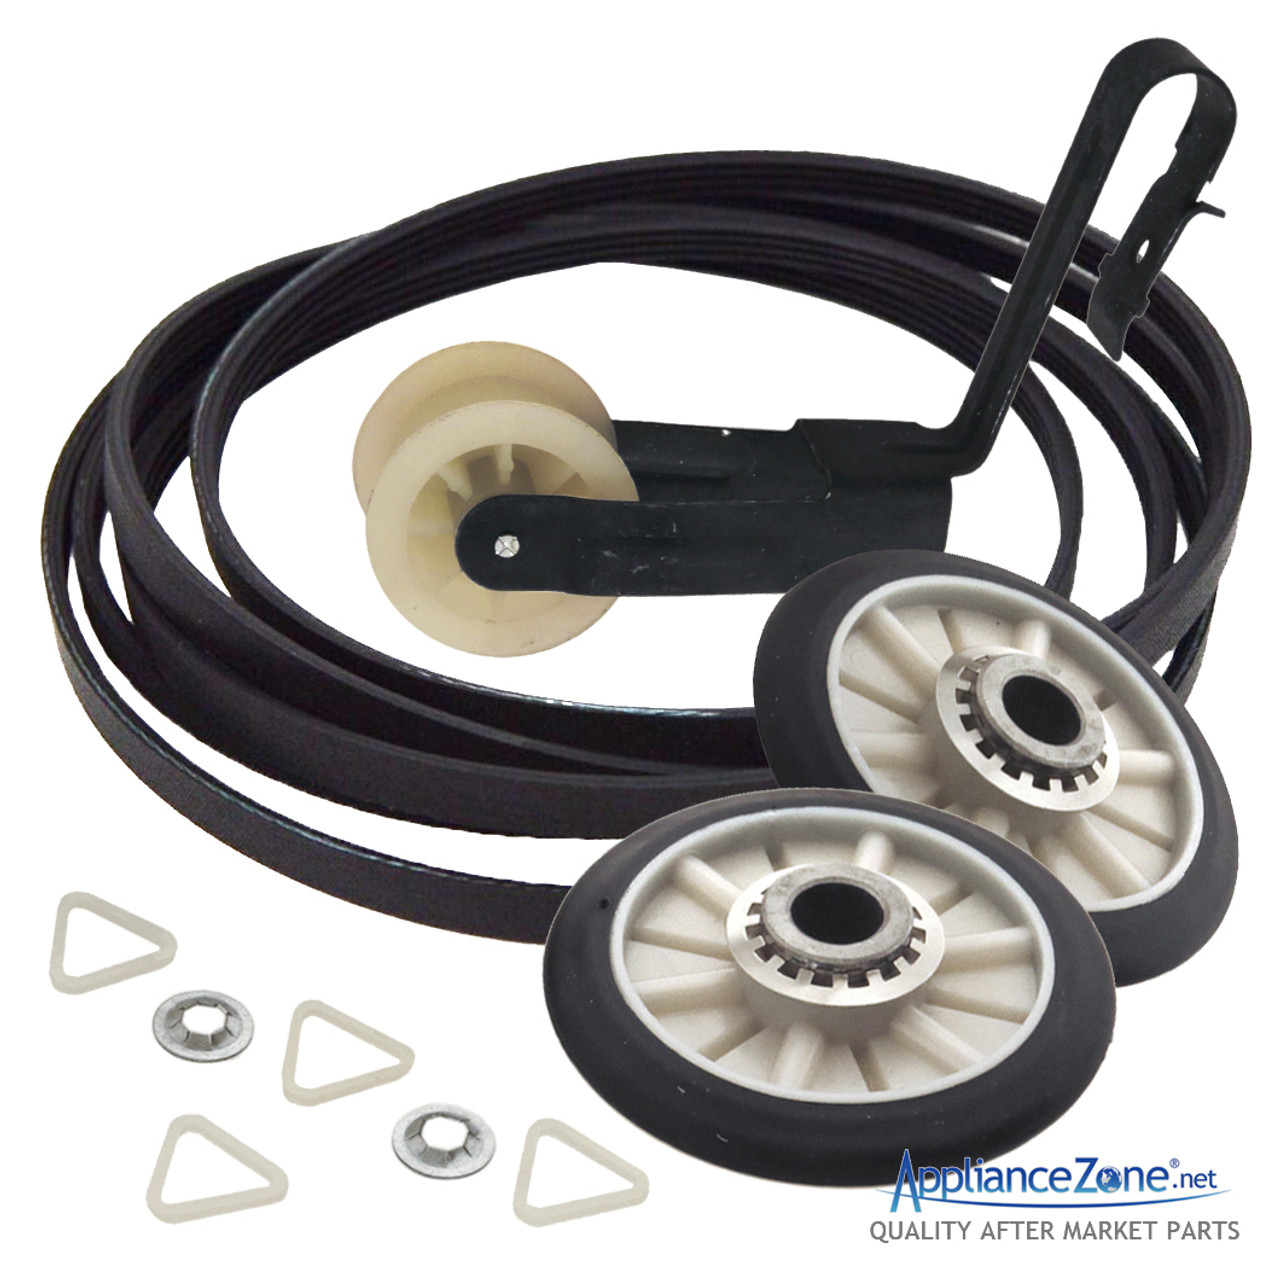 Replacement 4392068 Dryer Roller, Pulley & Belt Kit for Whirlpool ...